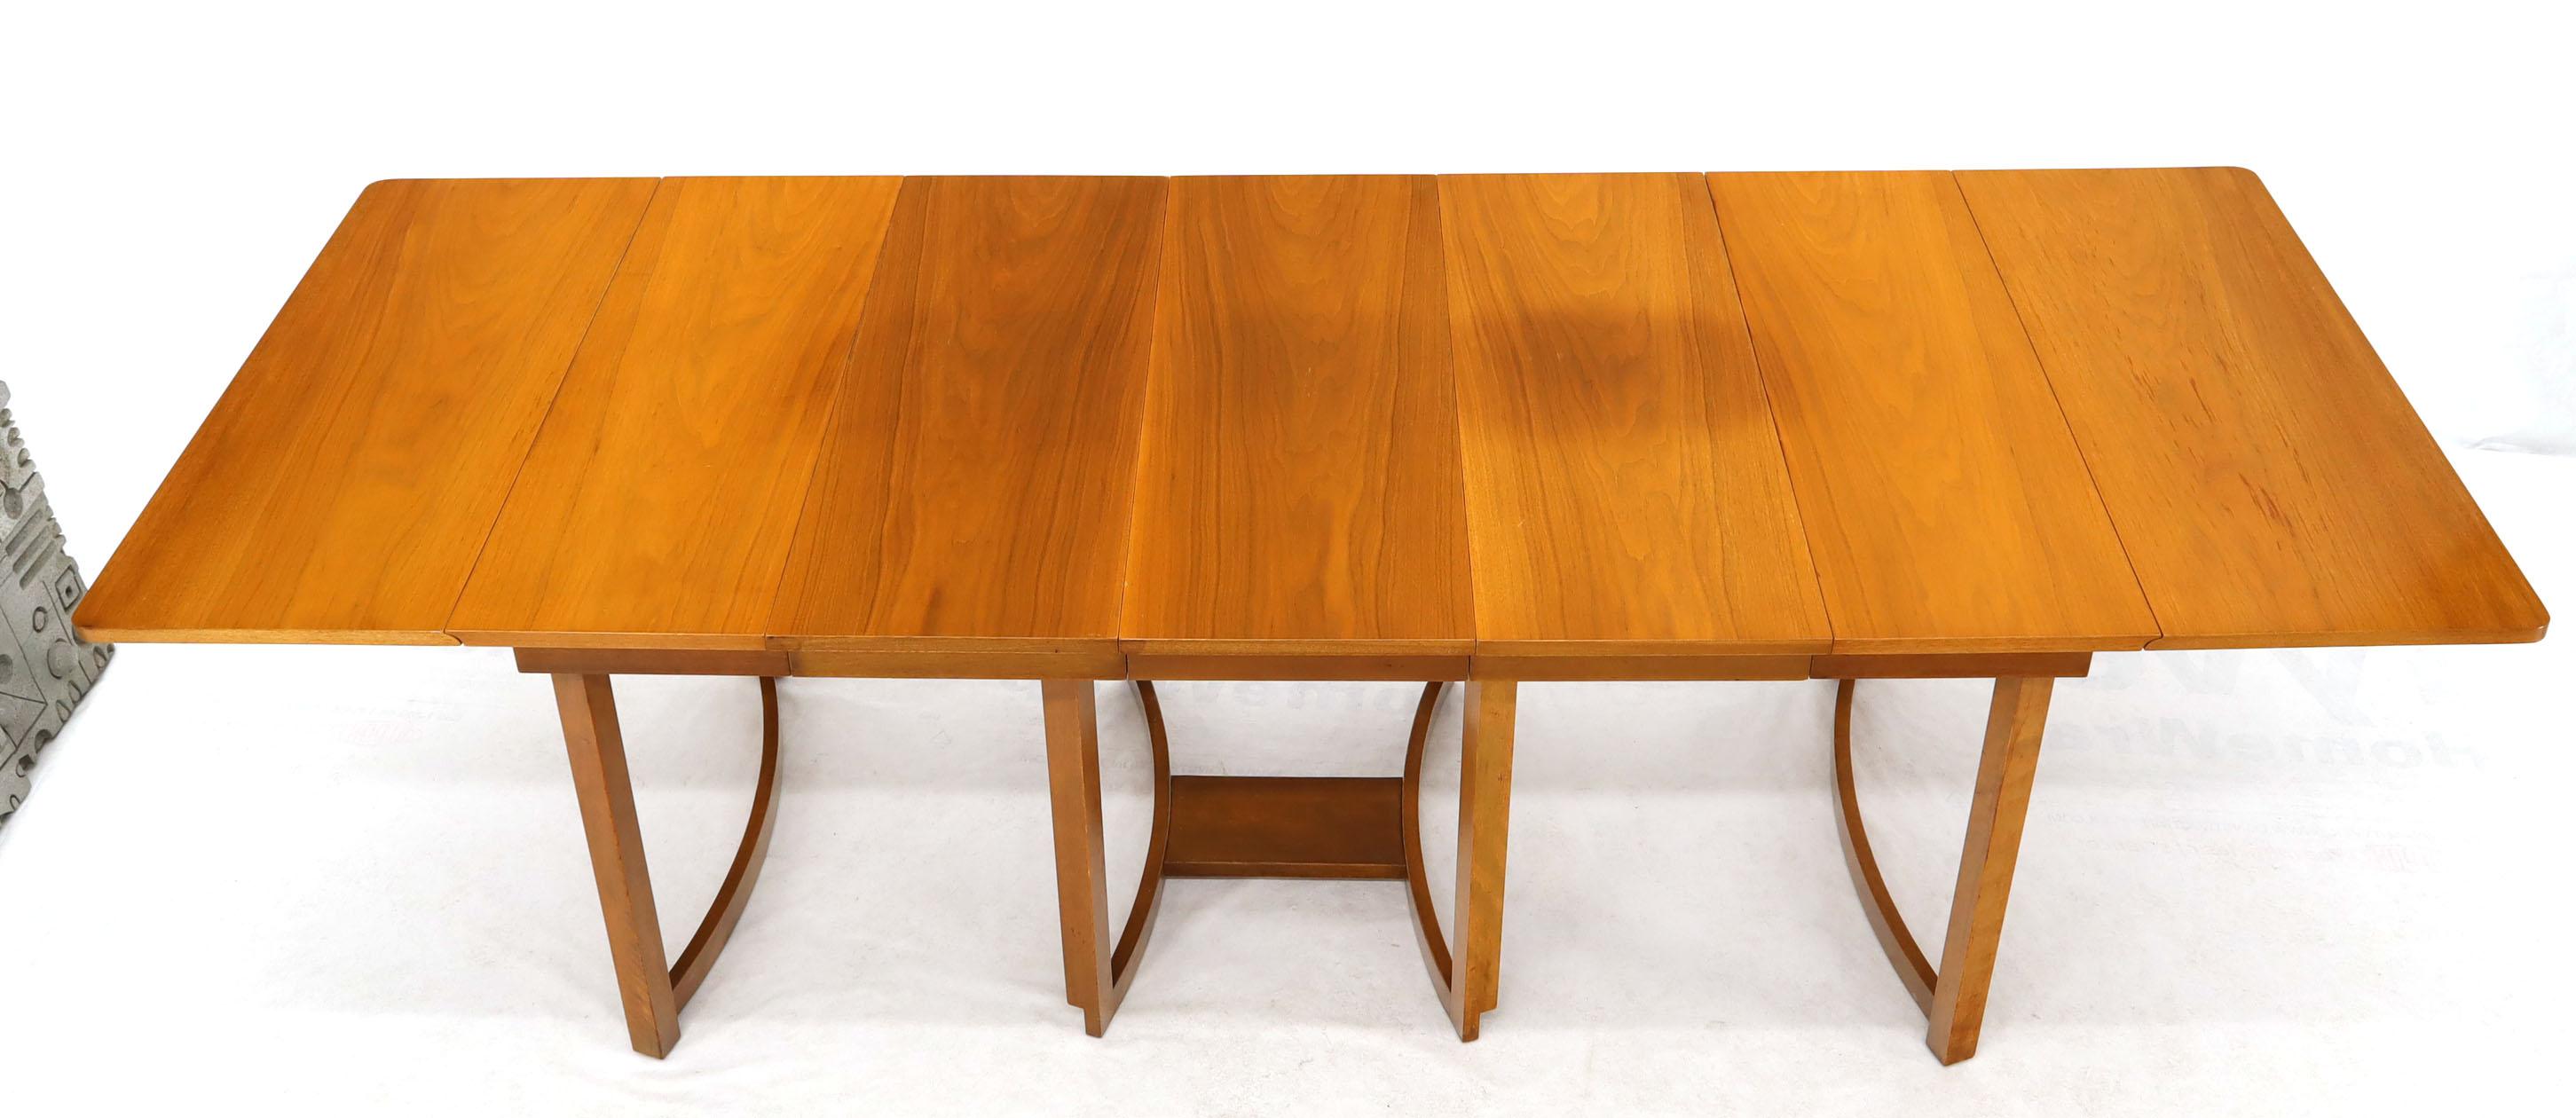 Midcentury Light Walnut Drop Leaf Expandable Dining Table, Three Leafs Boards For Sale 7